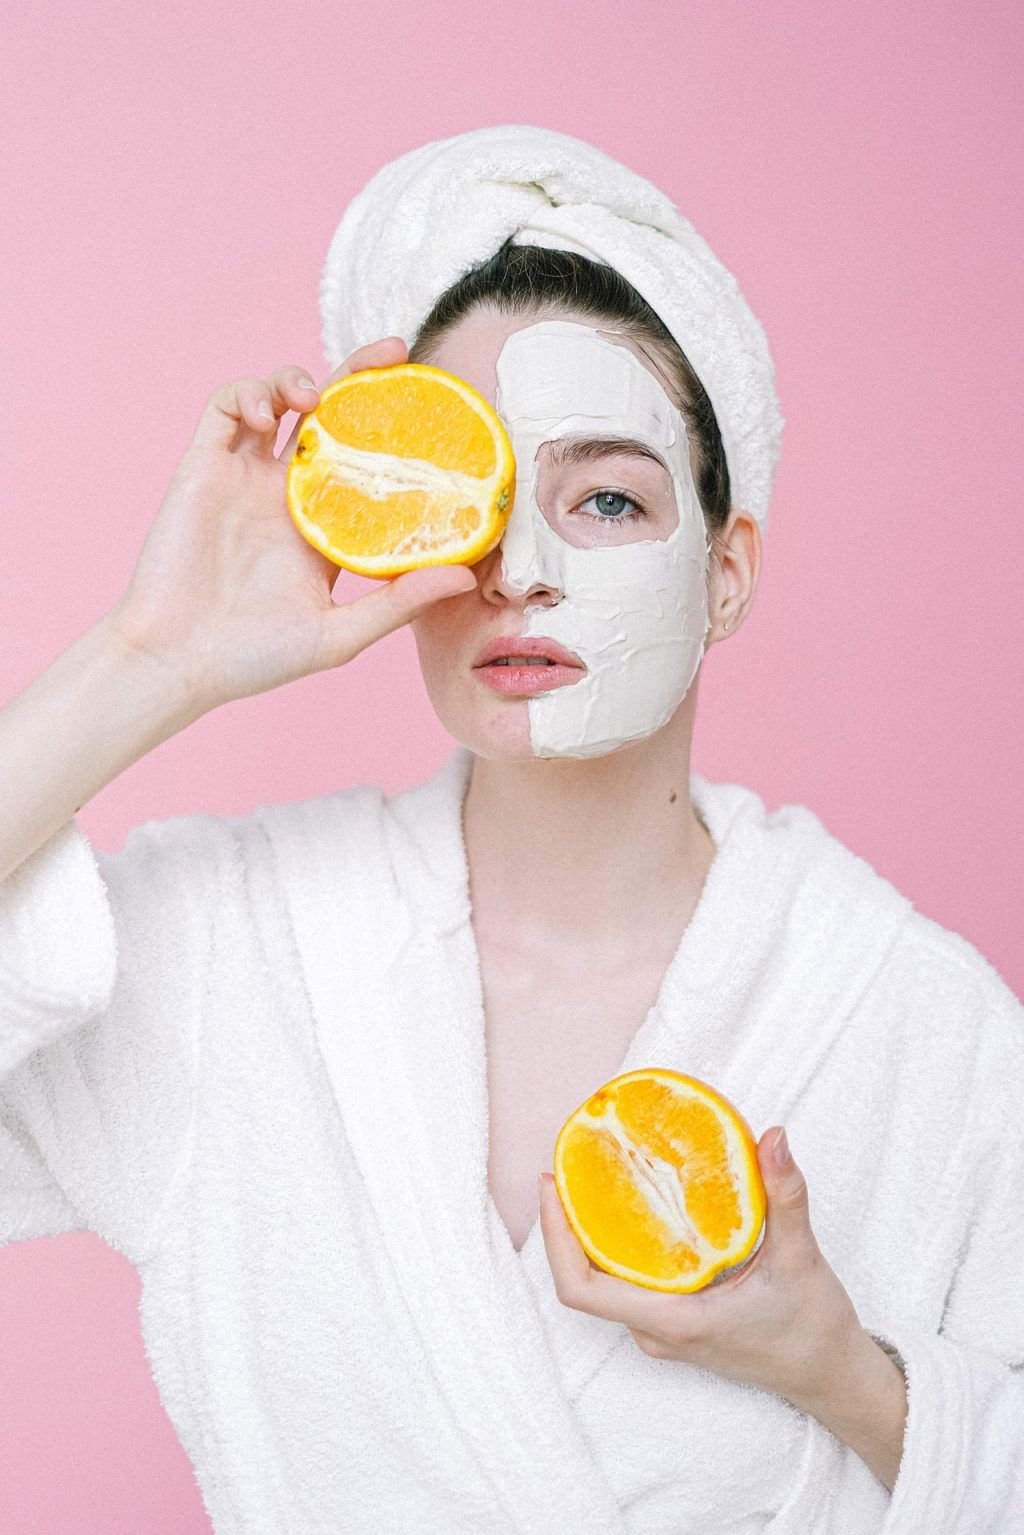 Which vitamin C skin brightening products are popular?